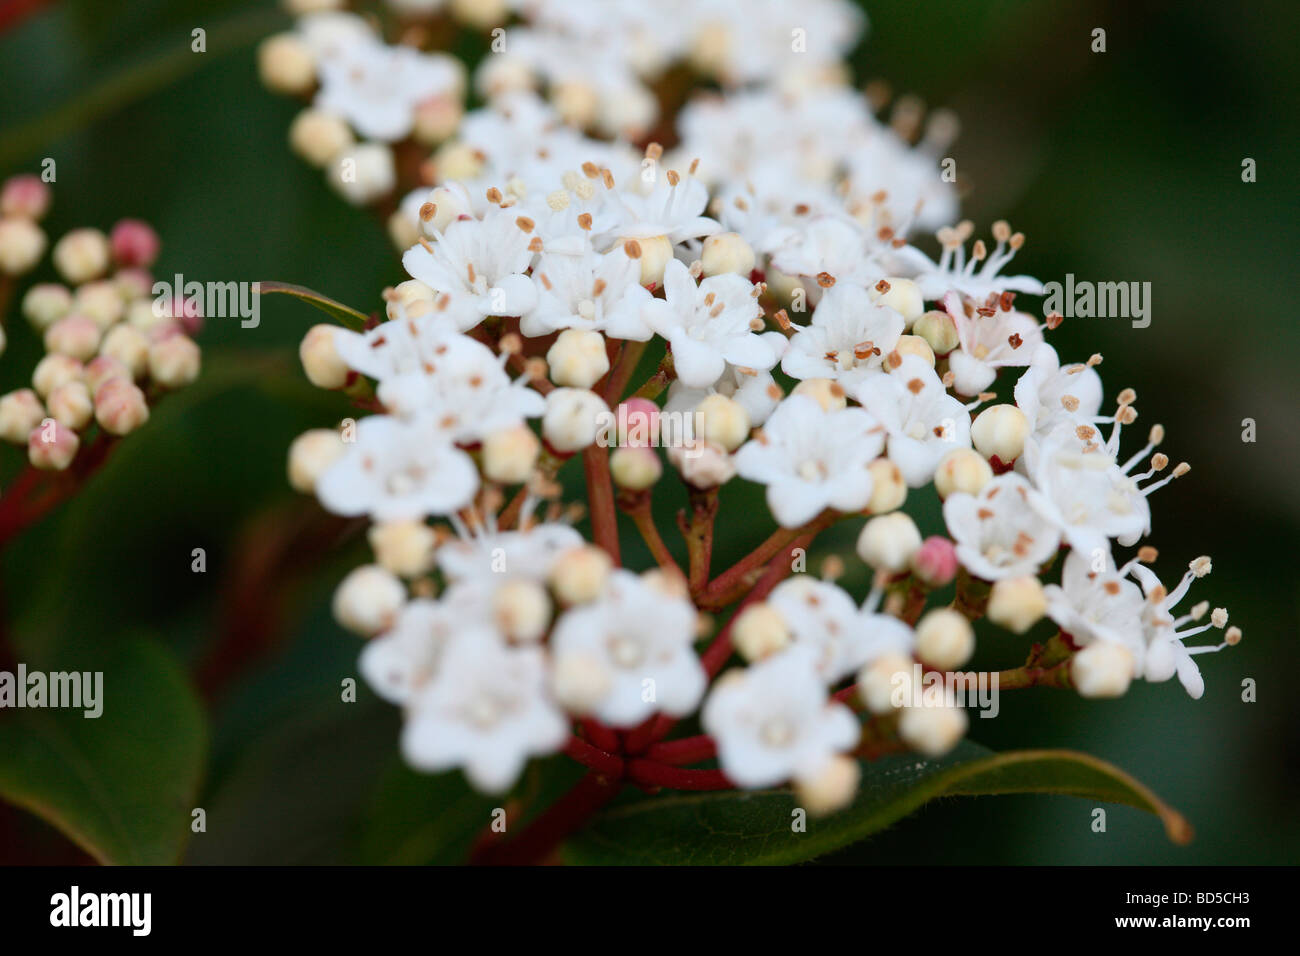 evergreen viburnum pink buds with clusters of white flowers fine art  photography Jane Ann Butler Photography JABP528 Stock Photo - Alamy